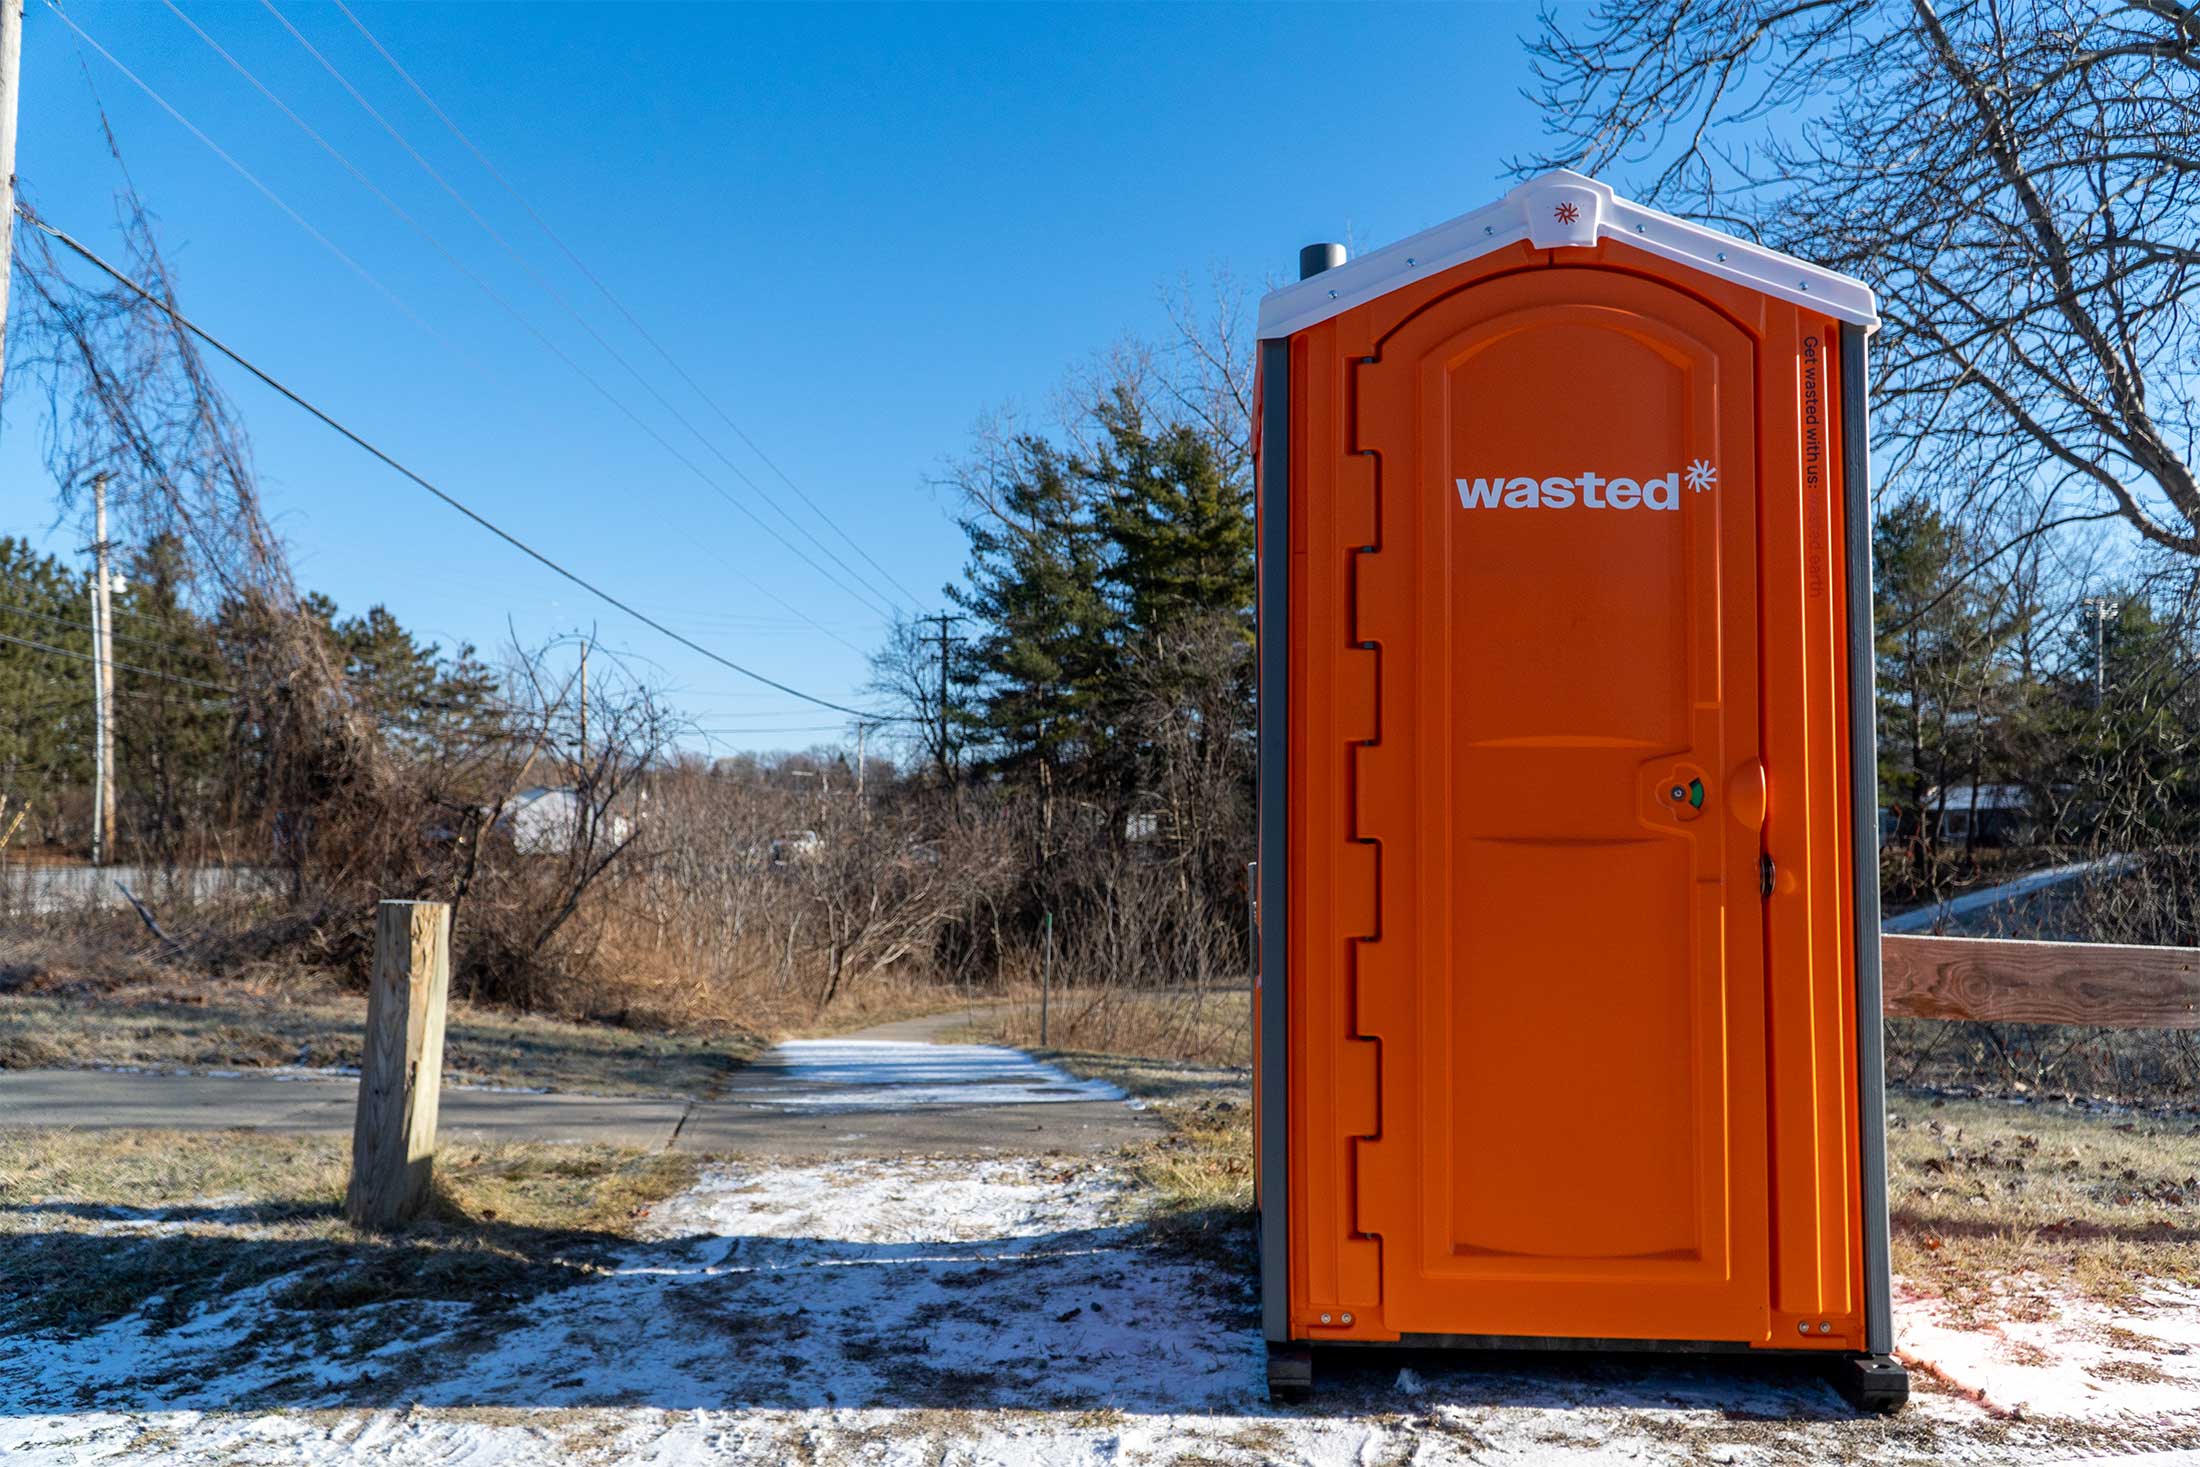 A Startup Is Turning Porta-Potties Into Sources of Fertilizer